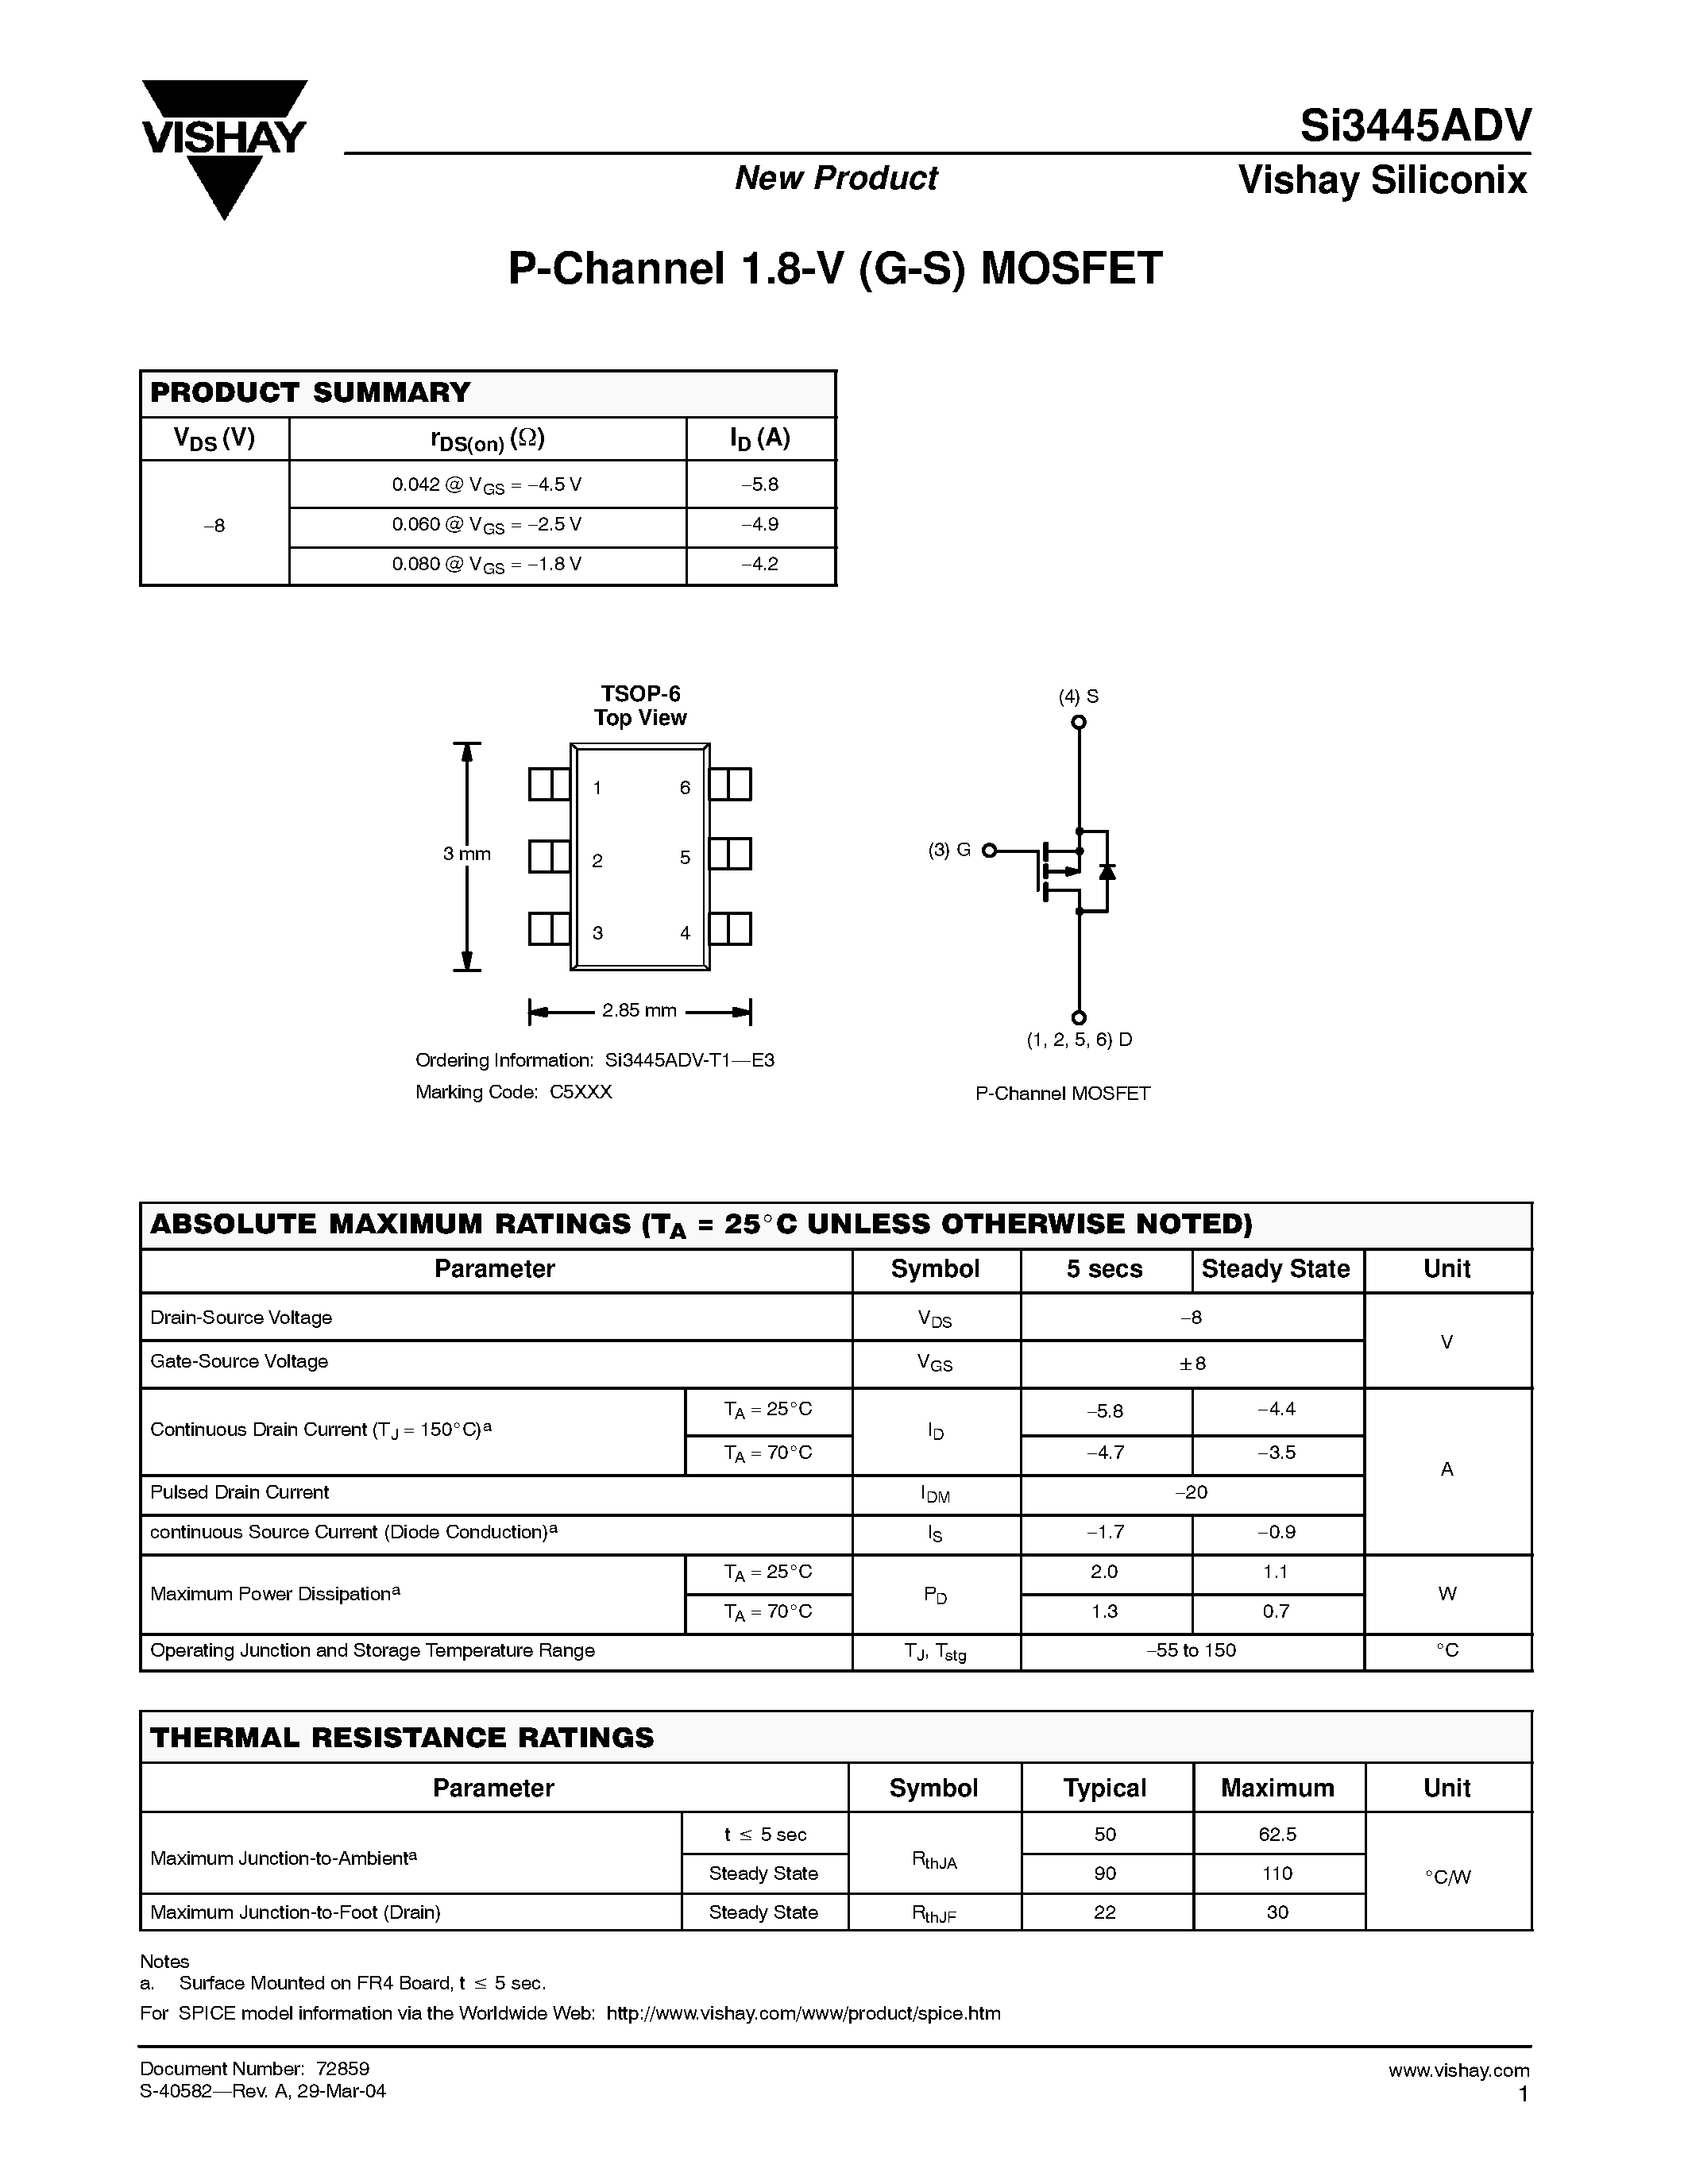 Datasheet SI3445ADV - P-Channel 1.8-V (G-S) MOSFET page 1